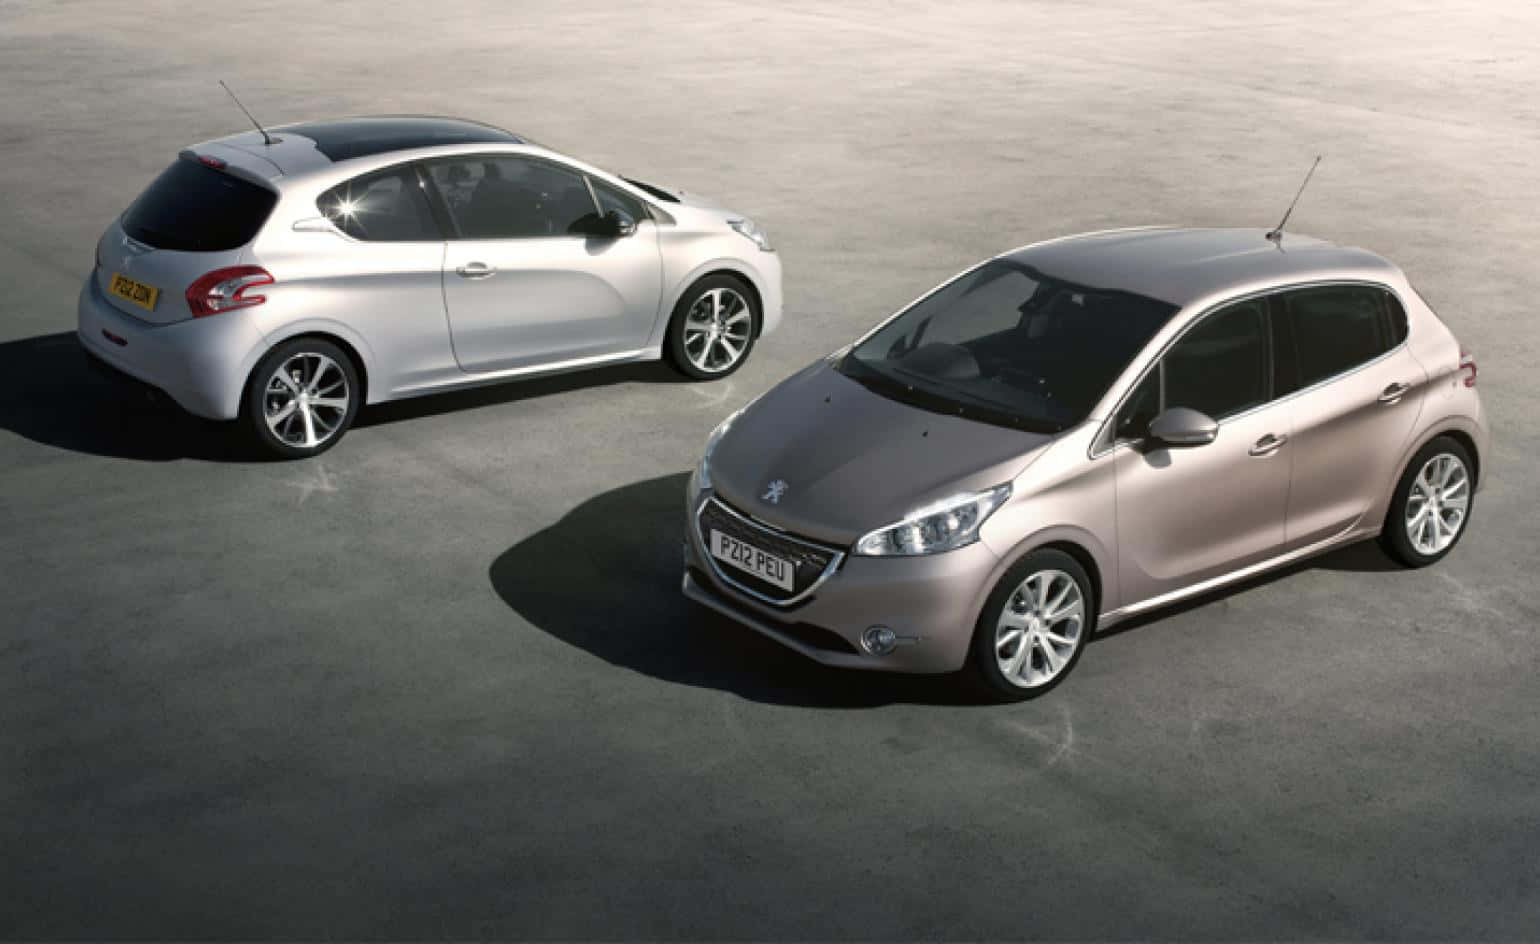 Sleek and Stylish Peugeot 208 in Action Wallpaper